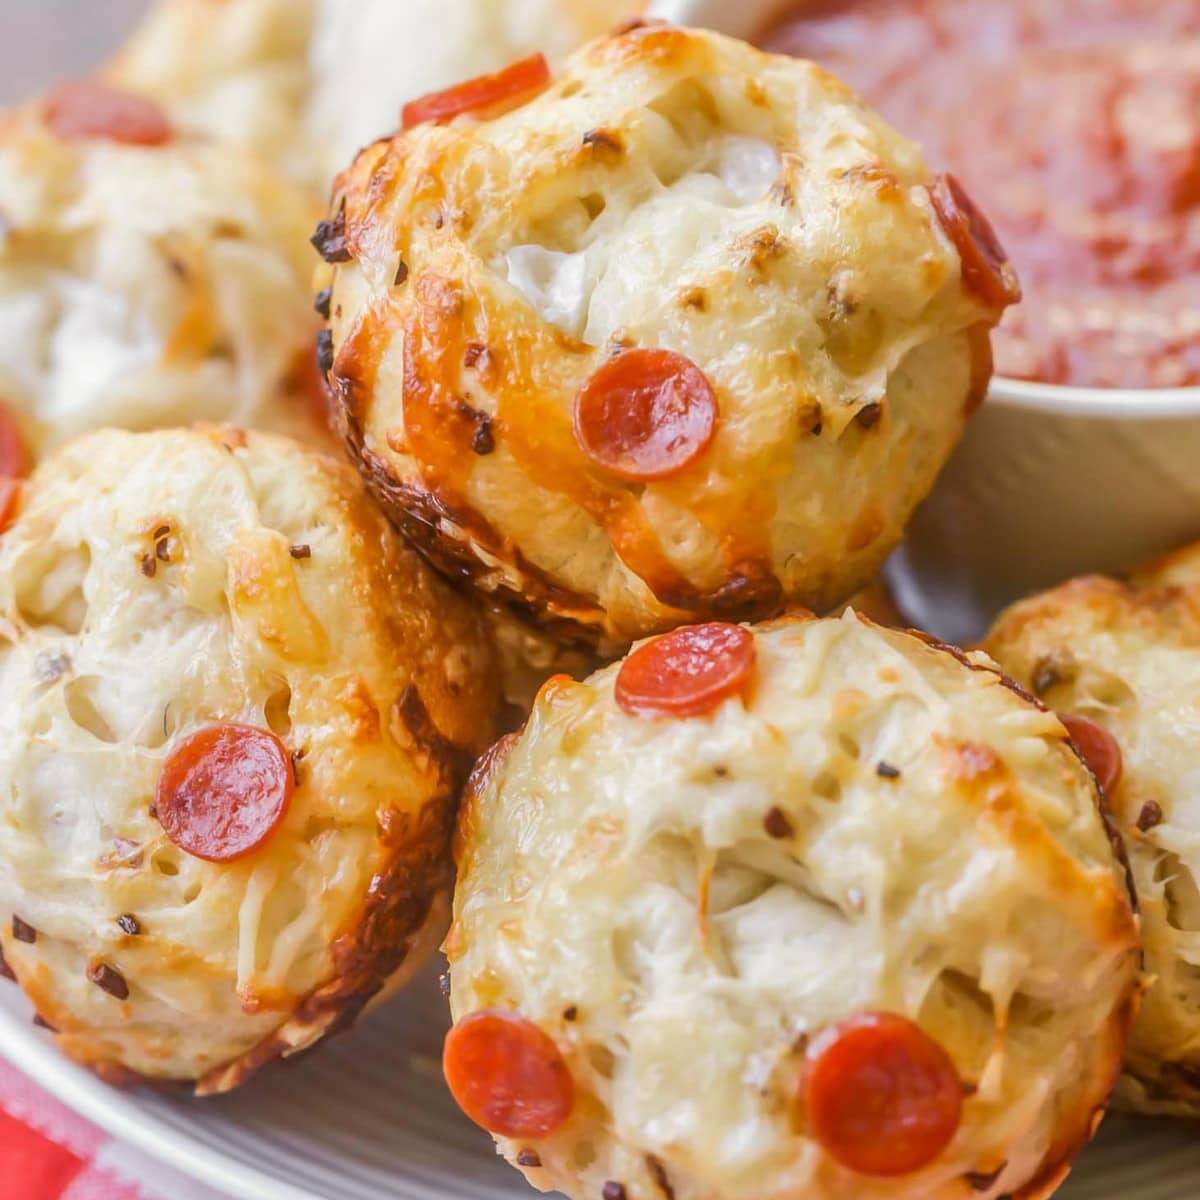 Halloween appetizers - pile of cheesy pizza muffins served with marinara.